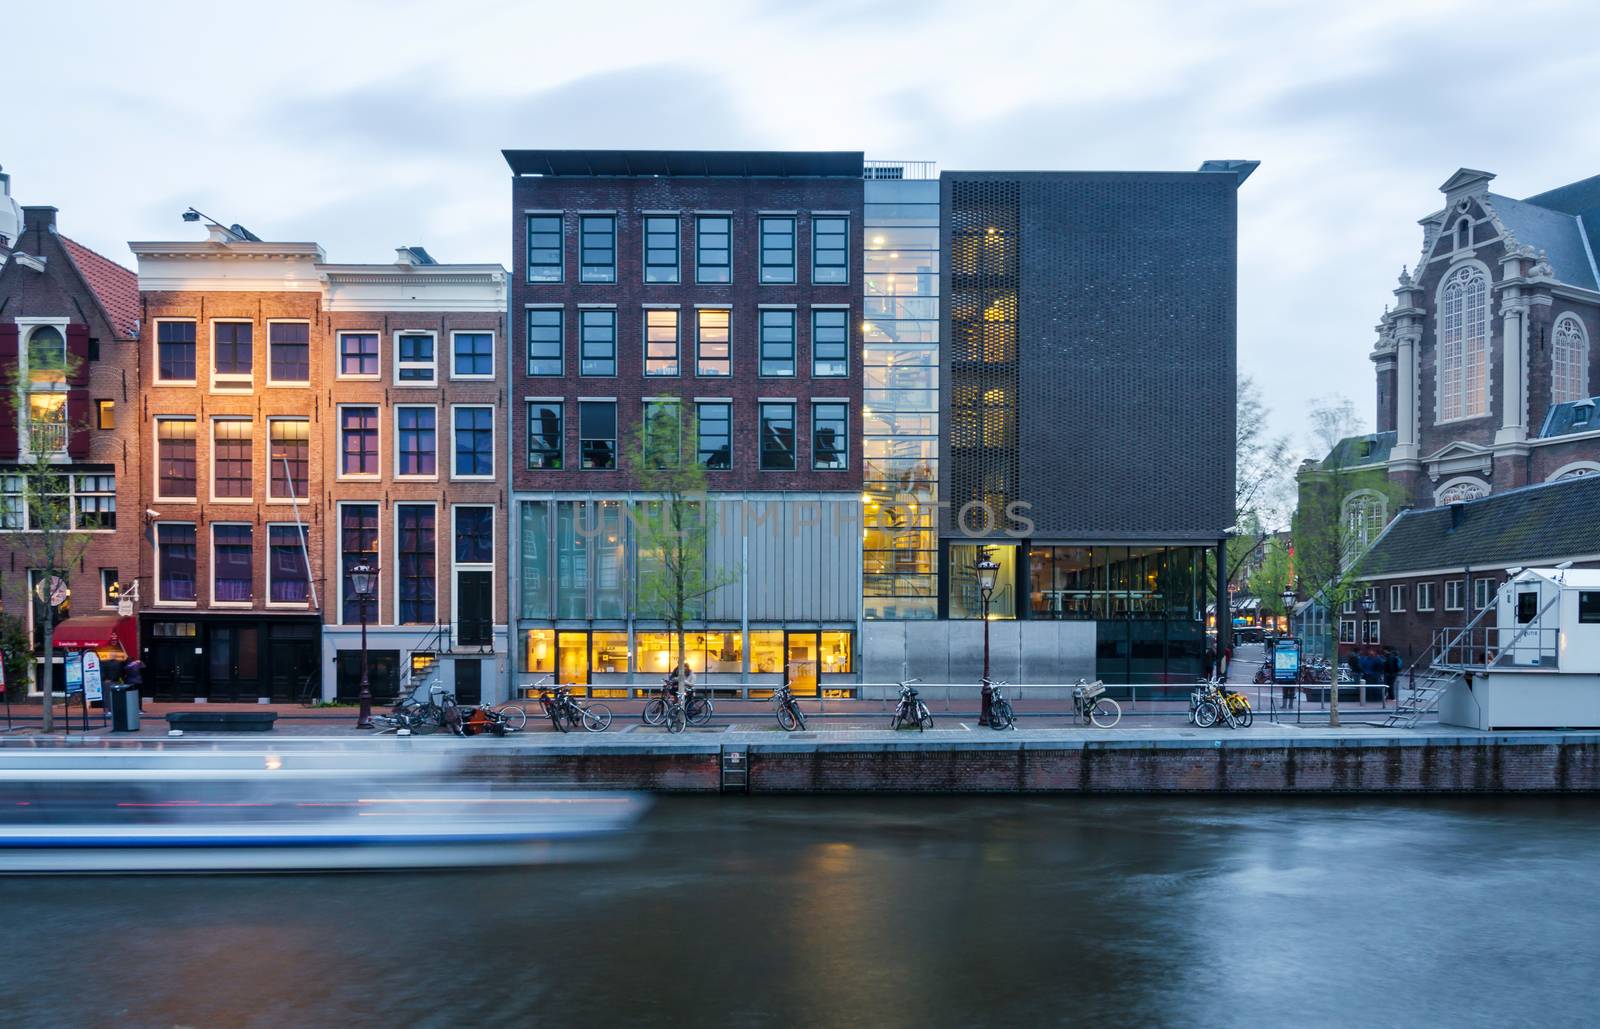 Amsterdam, Netherlands - May 7, 2015: Tourist visit Anne Frank house and holocaust museum in Amsterdam, the Netherlands, on May 7, 2015. Anne Frank house is a popular tourist destination